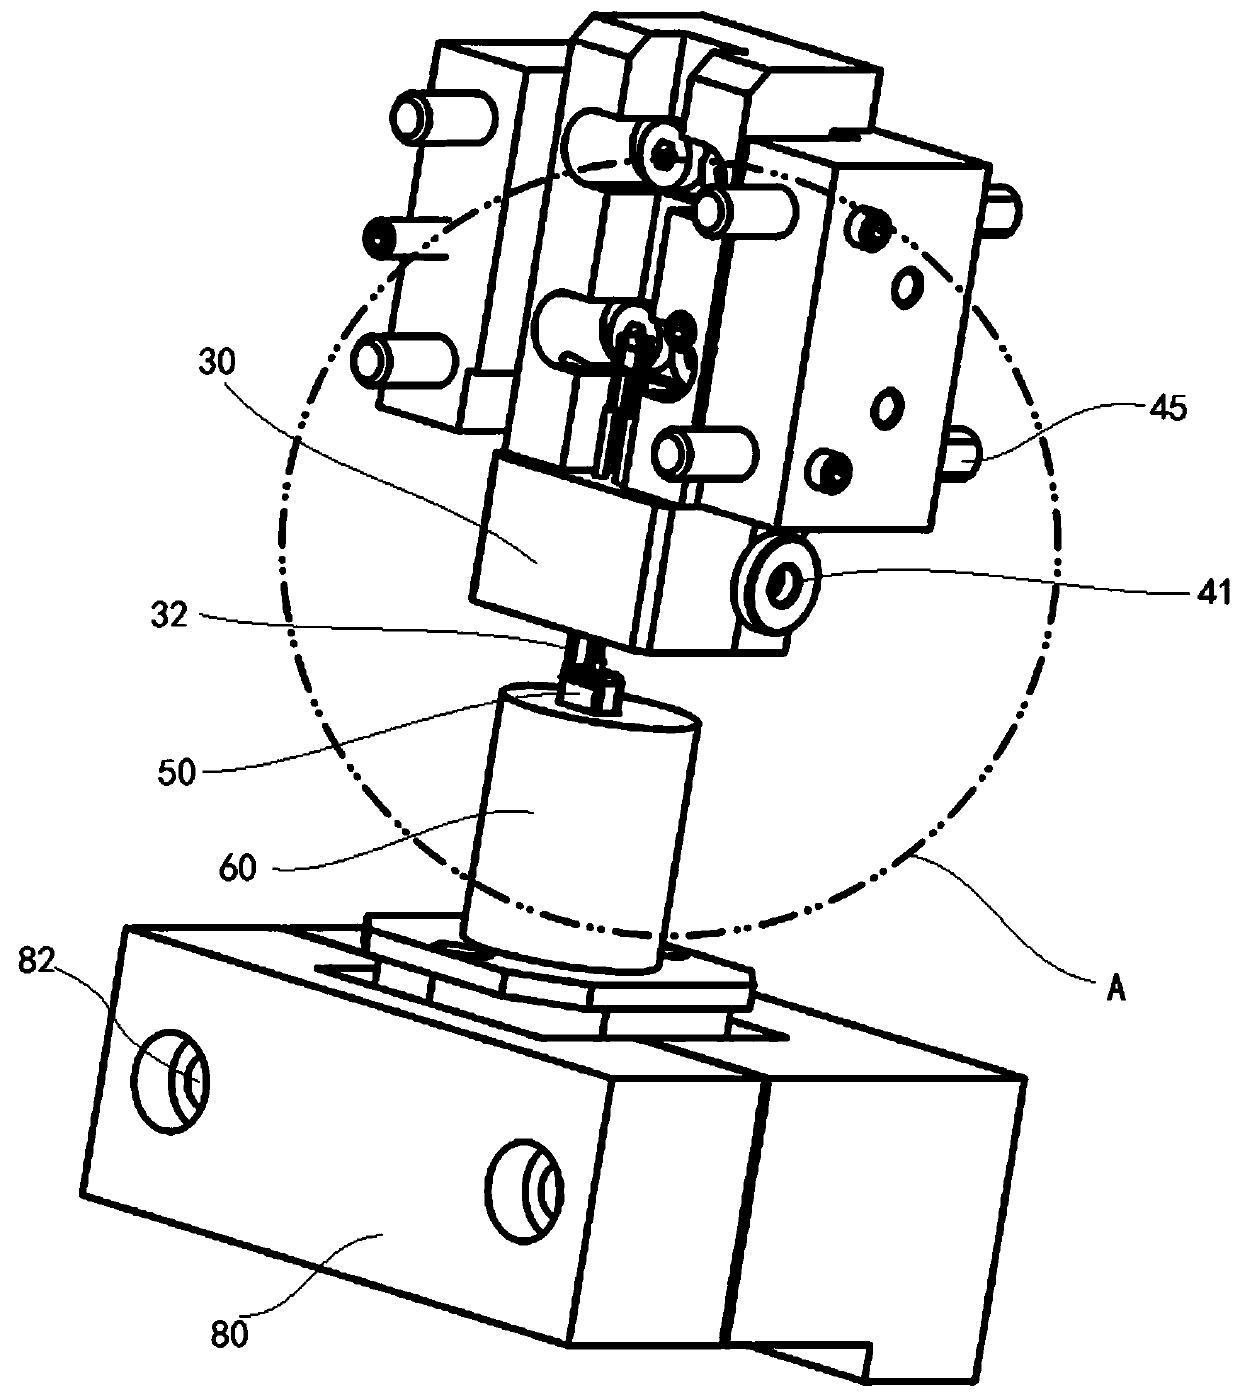 A receiver acoustic testing device and acoustic testing system